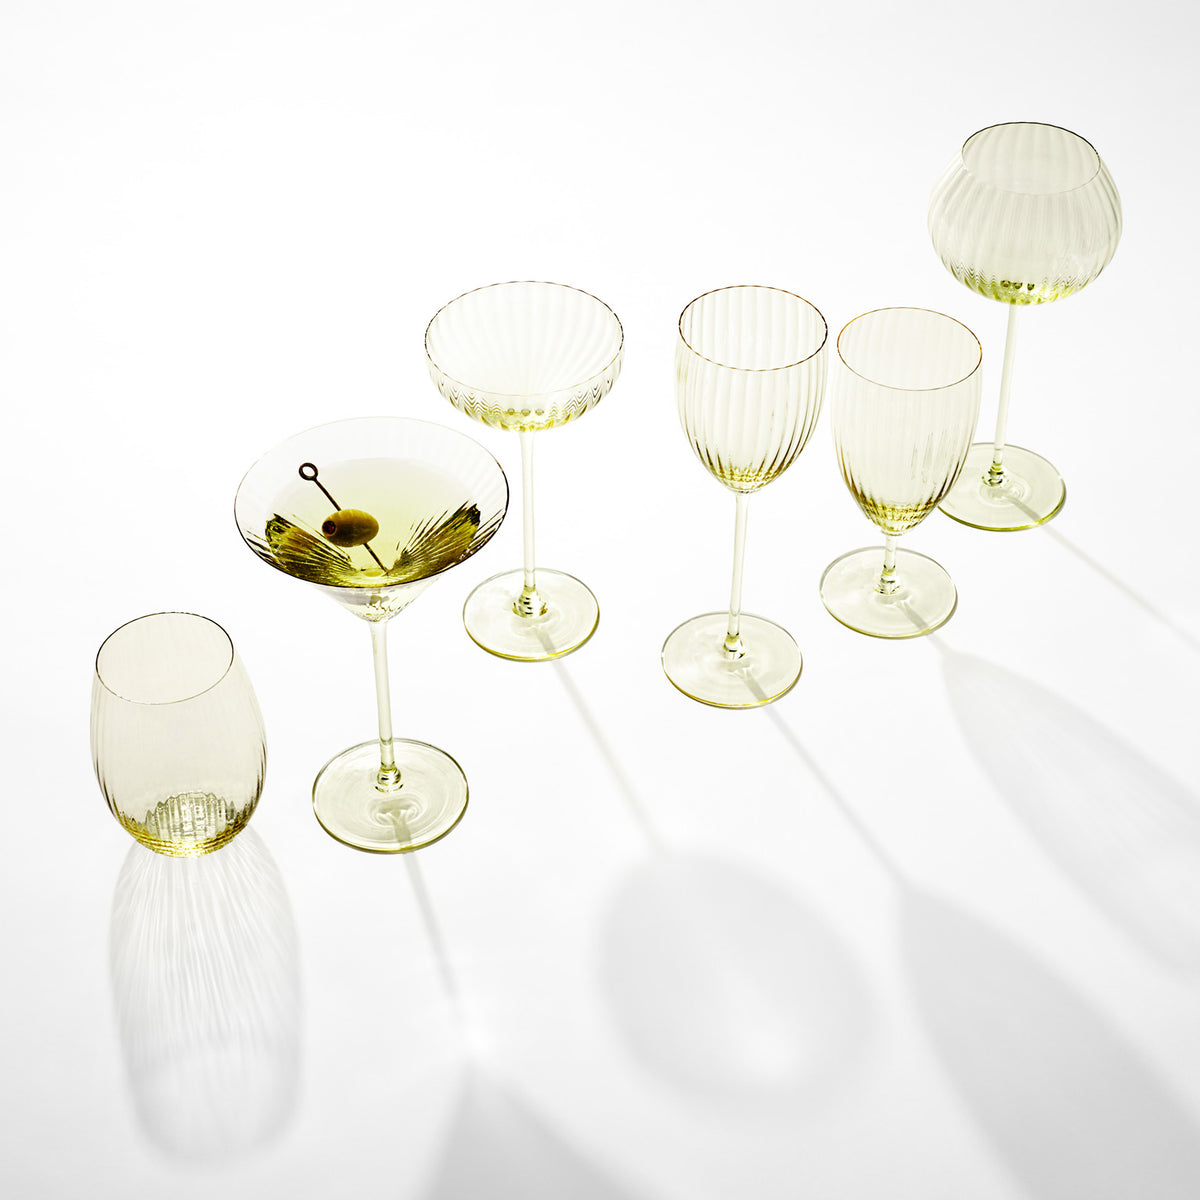 Quinn citrine yellow mouth-blown crystal red wine glasses from Caskata.